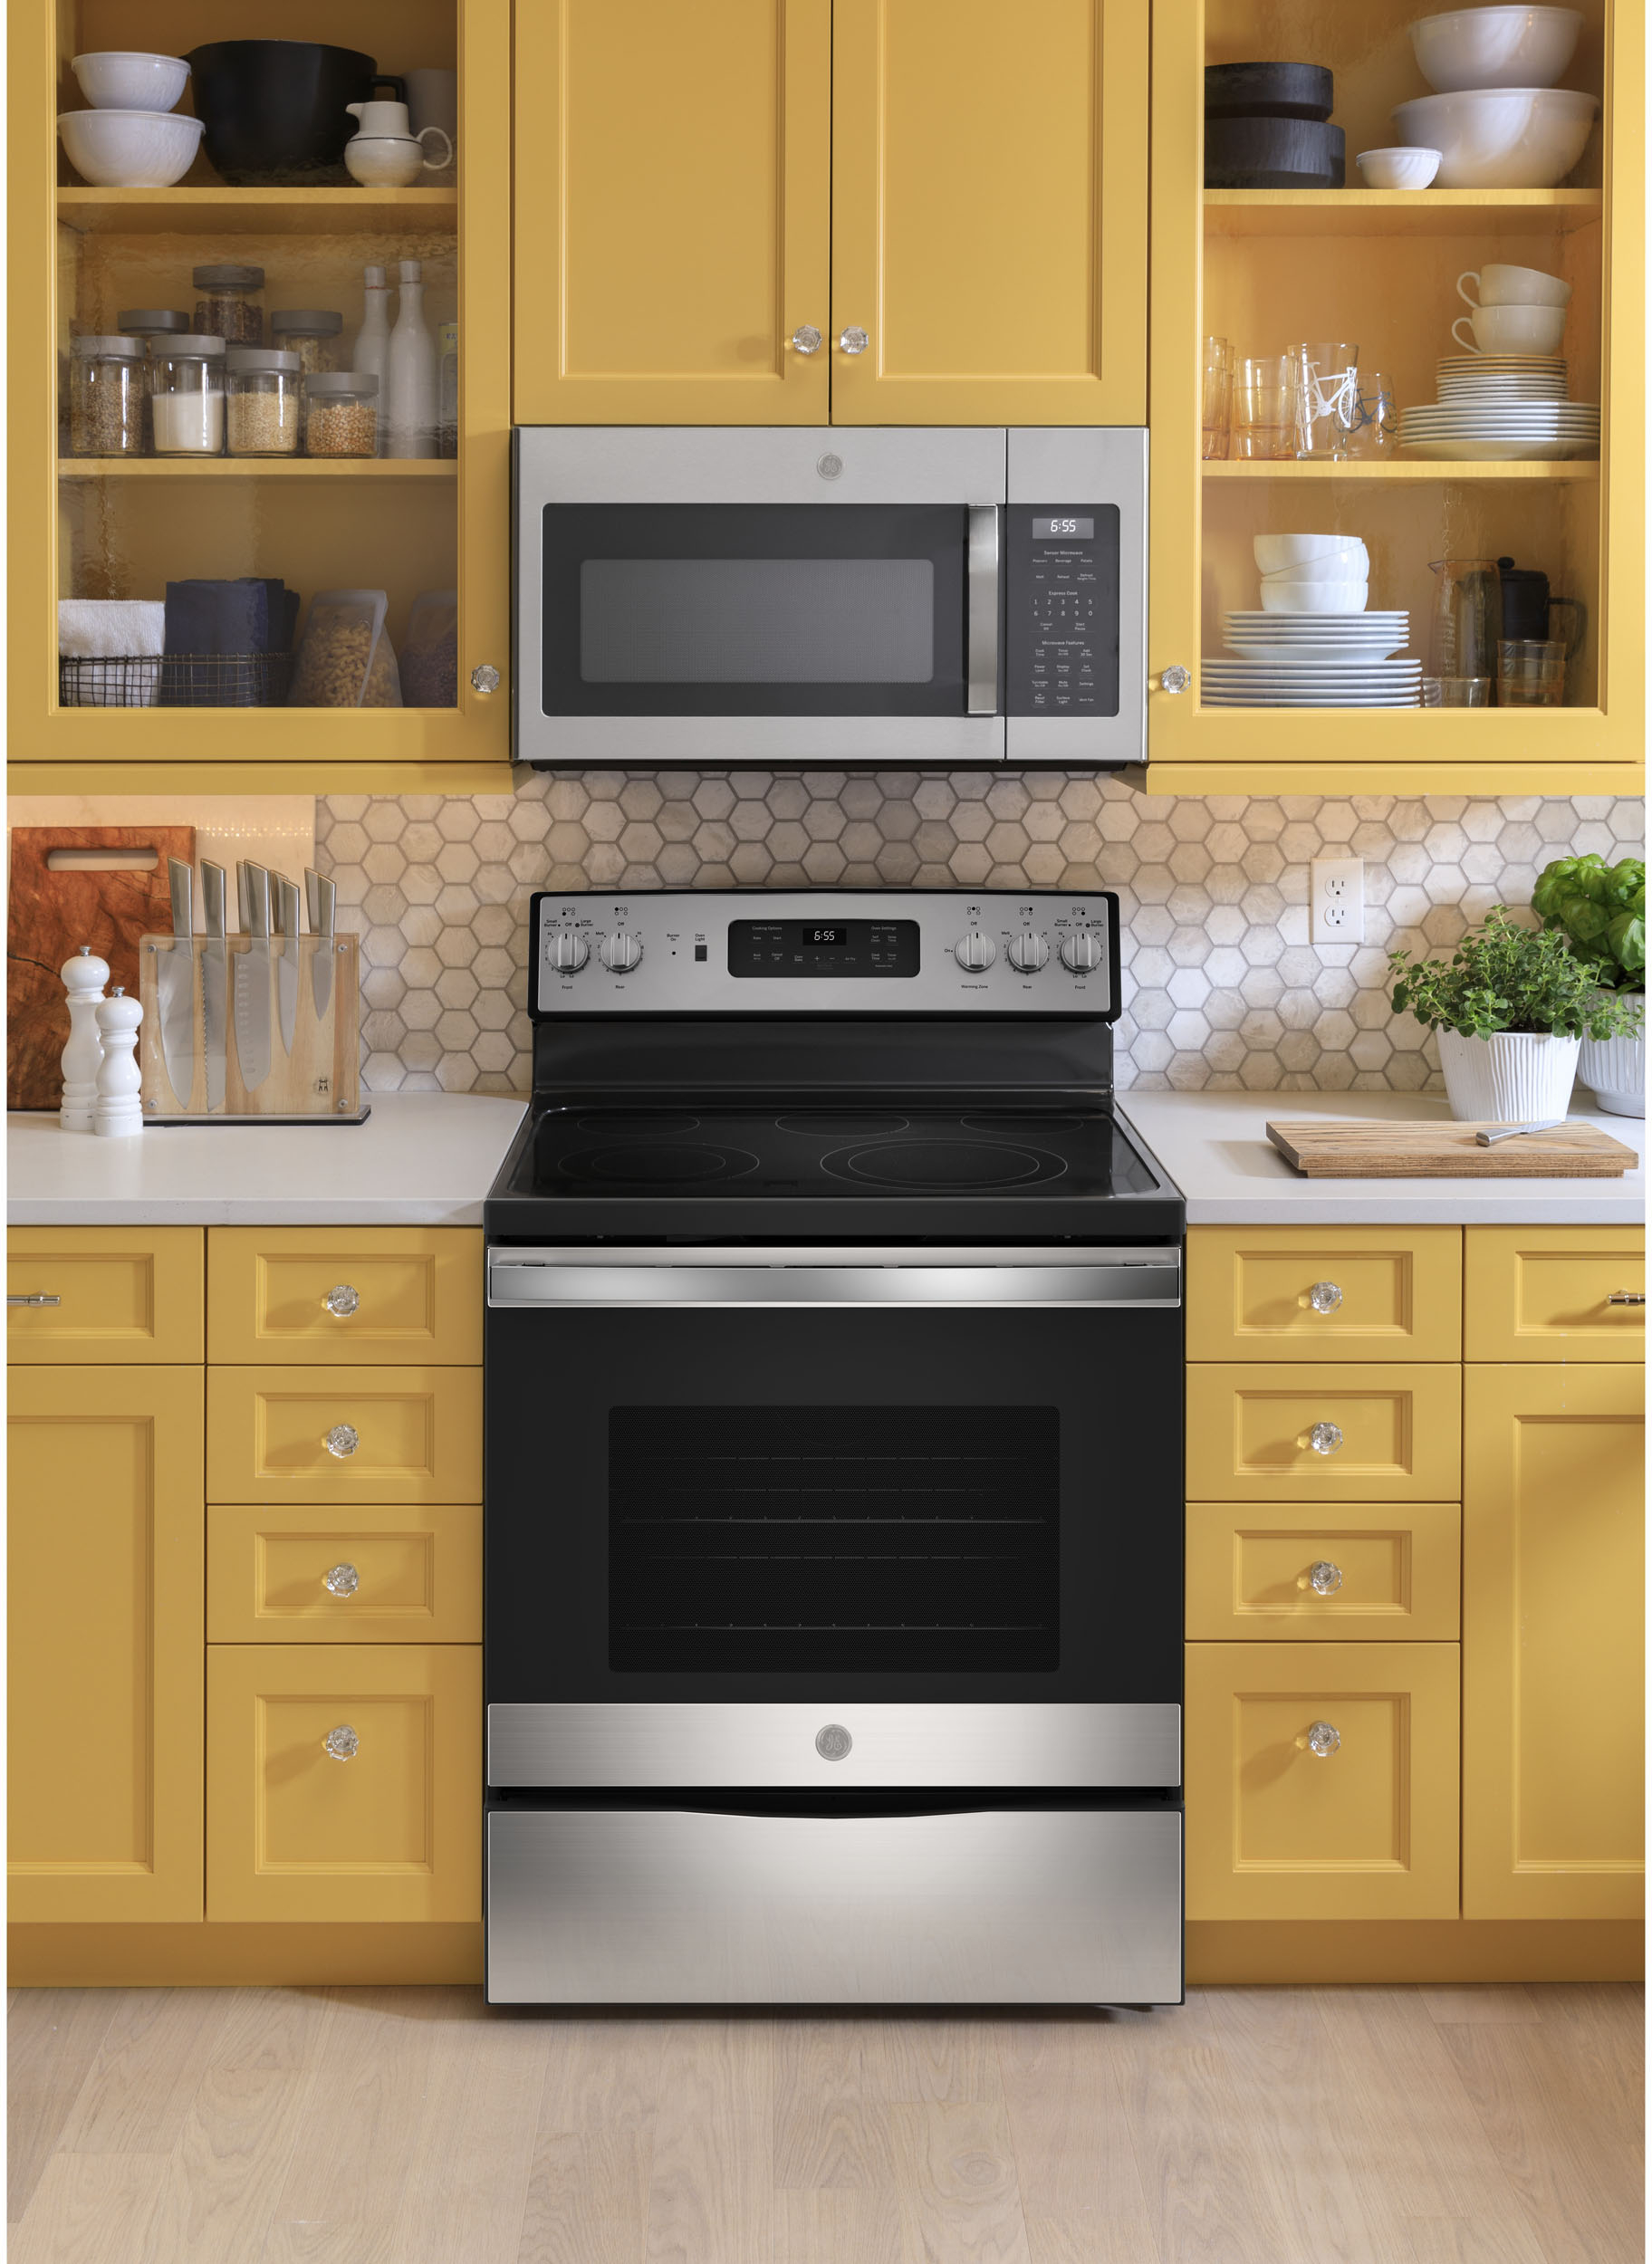 GE Appliances JB625RKSS 30 Free-Standing Electric Range with Power Boil  Element, Furniture and ApplianceMart